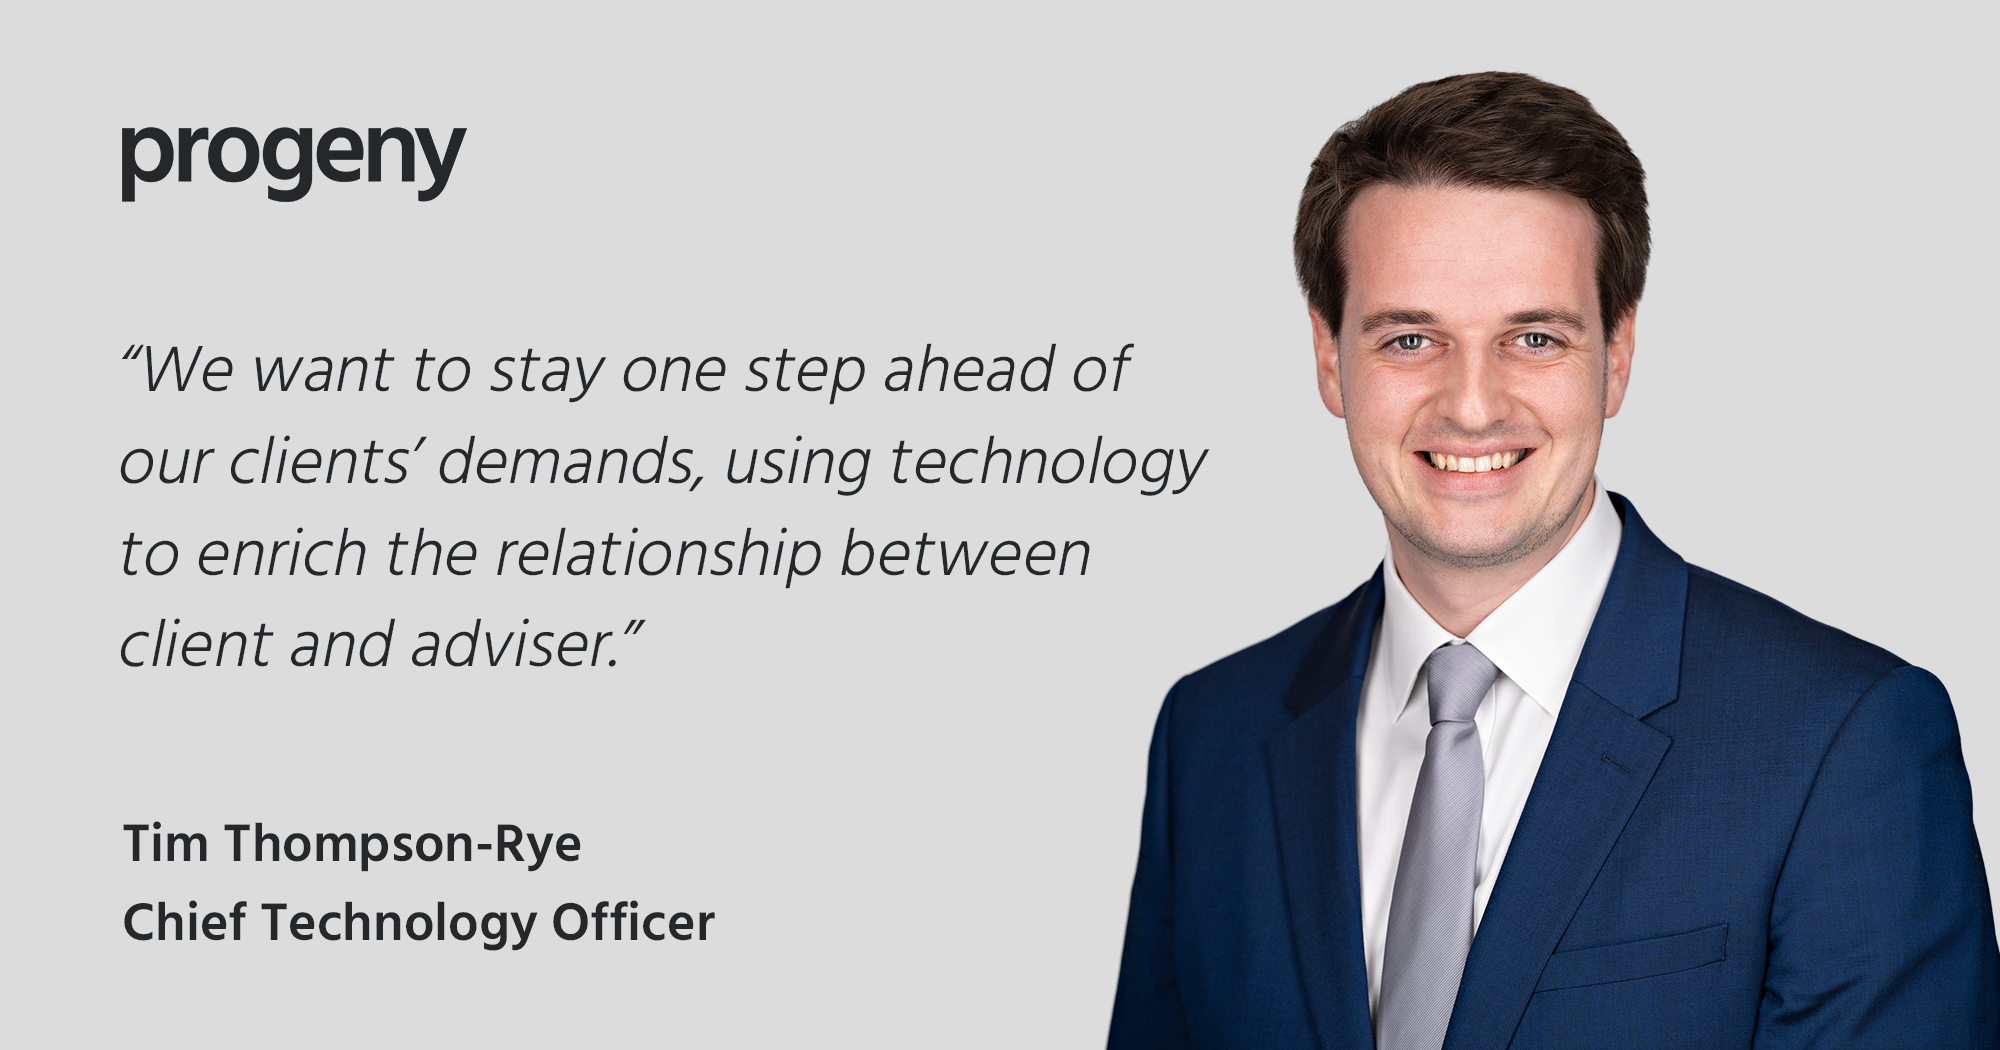 “We want to stay one step ahead of our clients’ demands, using technology to enrich the relationship between client and adviser” – Tim Thompson-Rye, Chief Technology Officer, Progeny